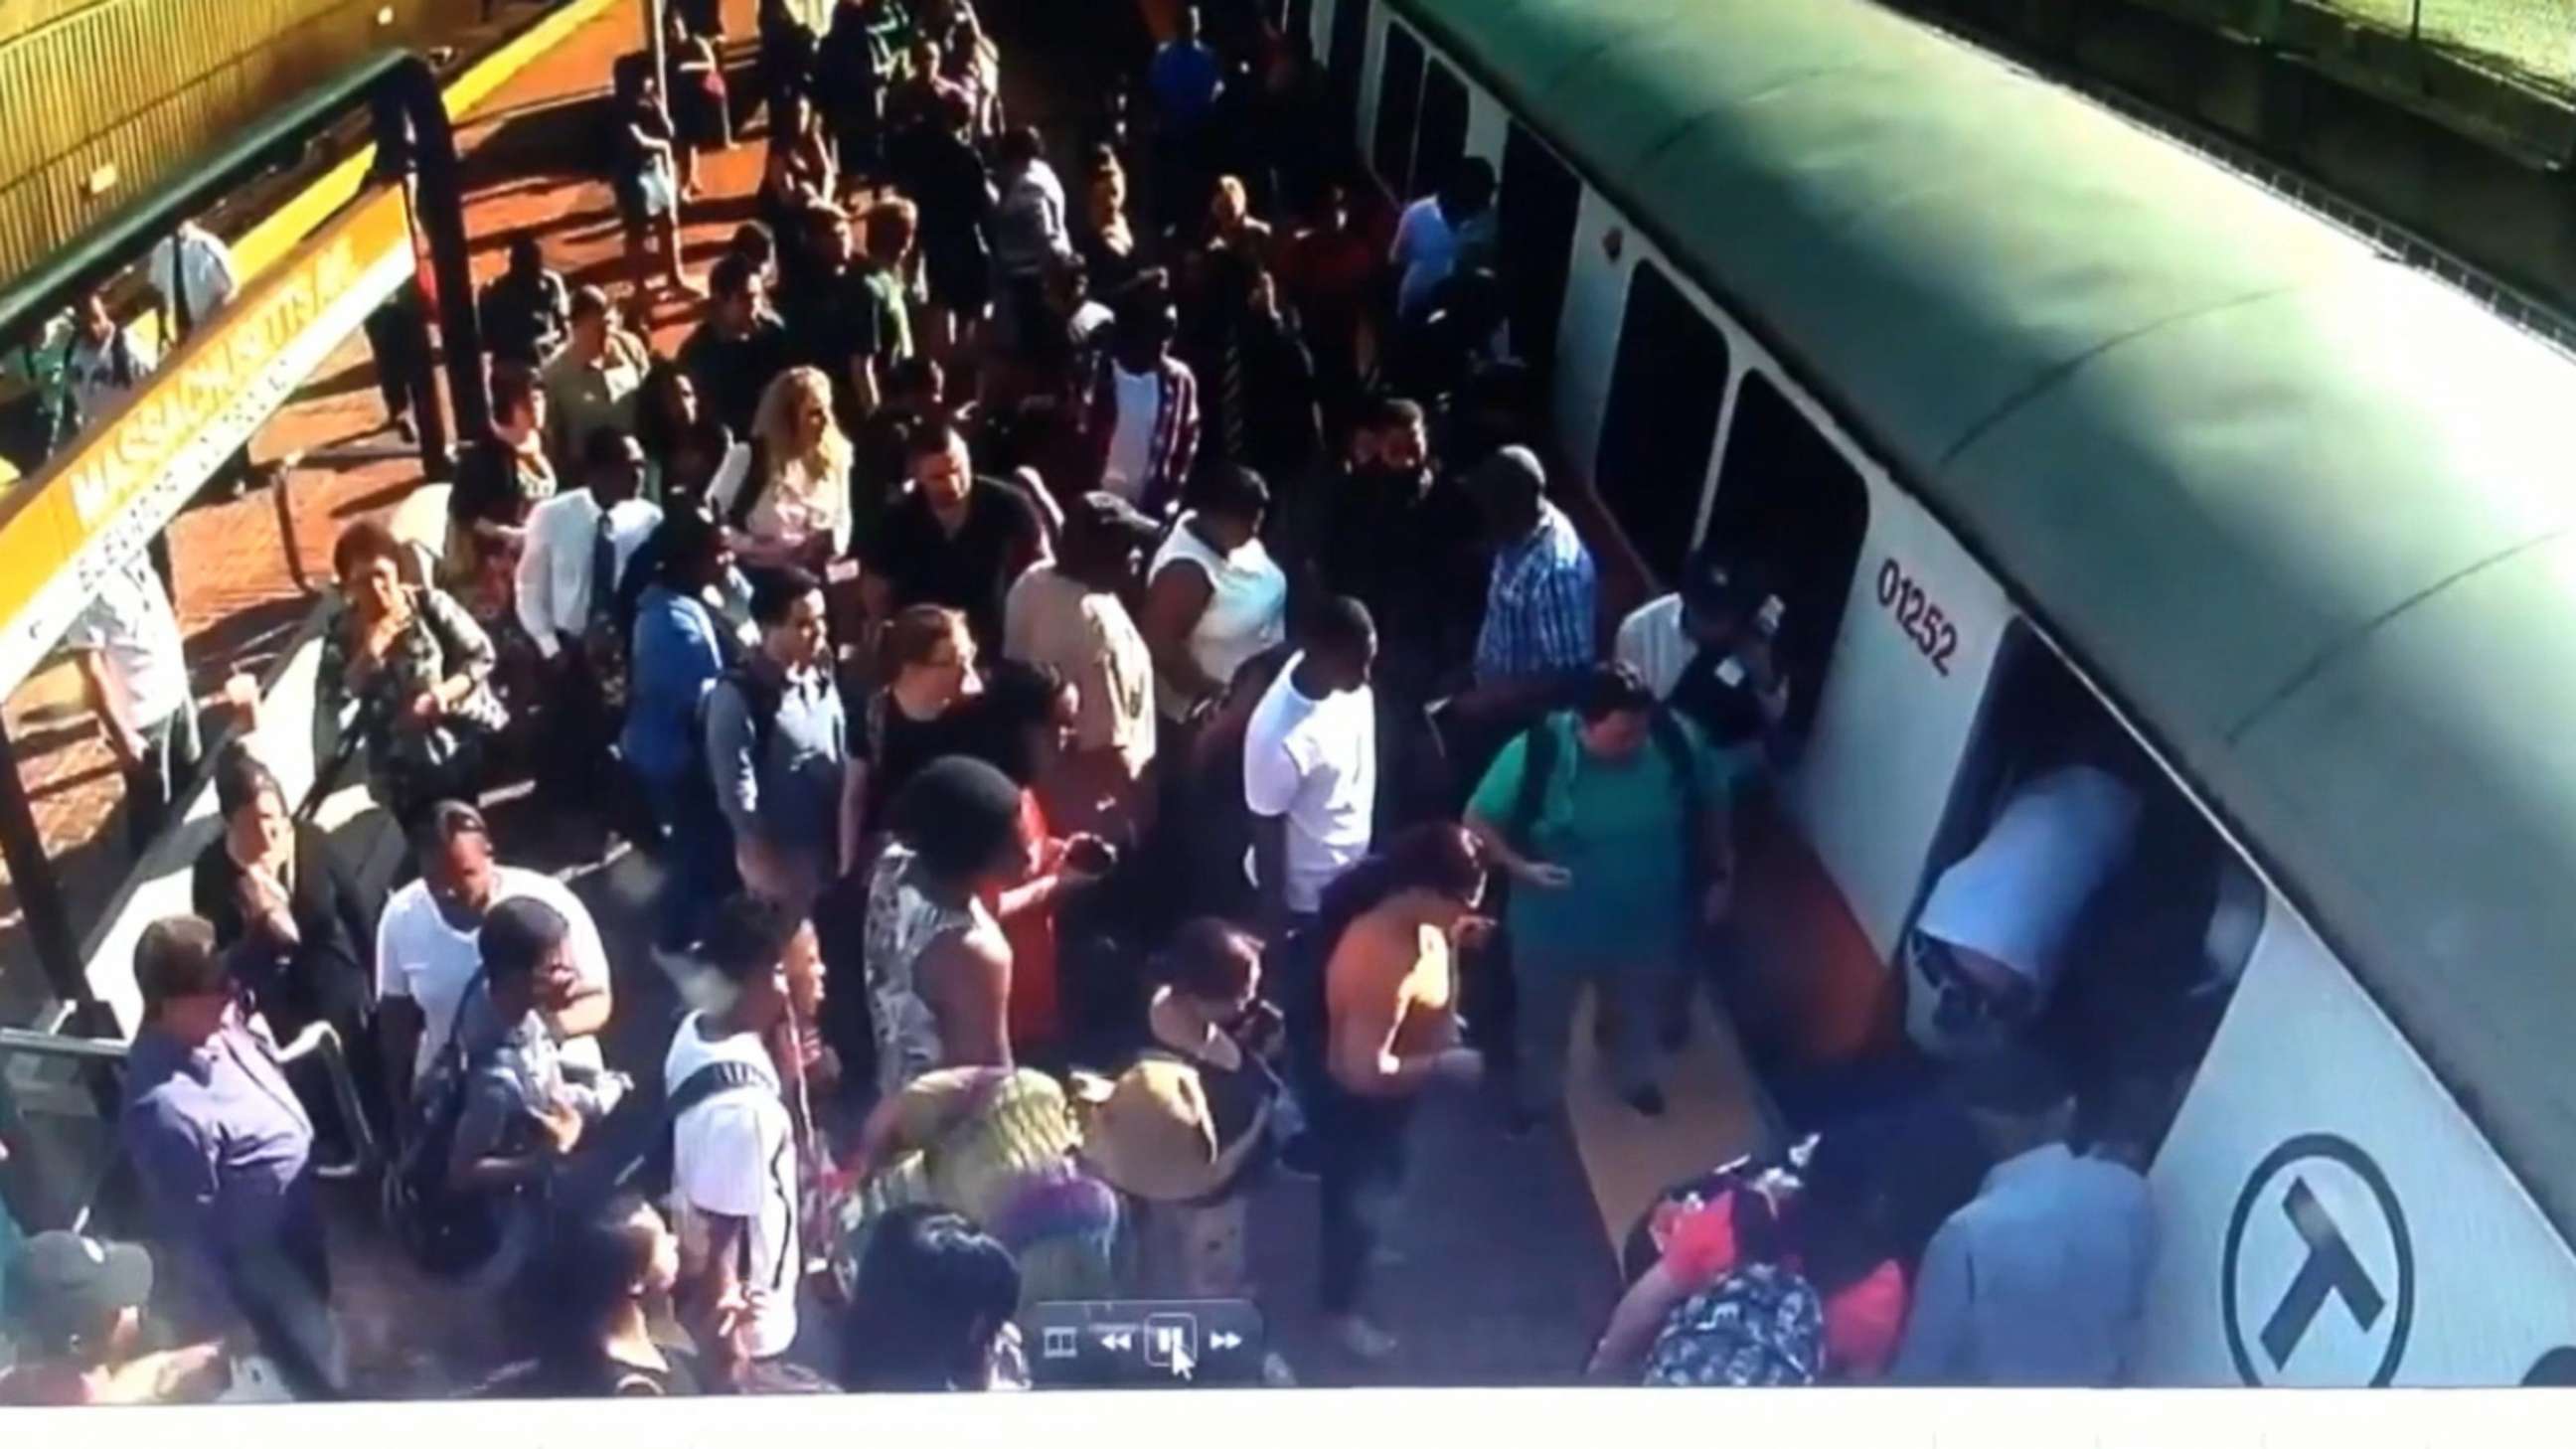 PHOTO: Video shows riders attempting to push the train to free the stranded woman in Boston, June 29, 2018.